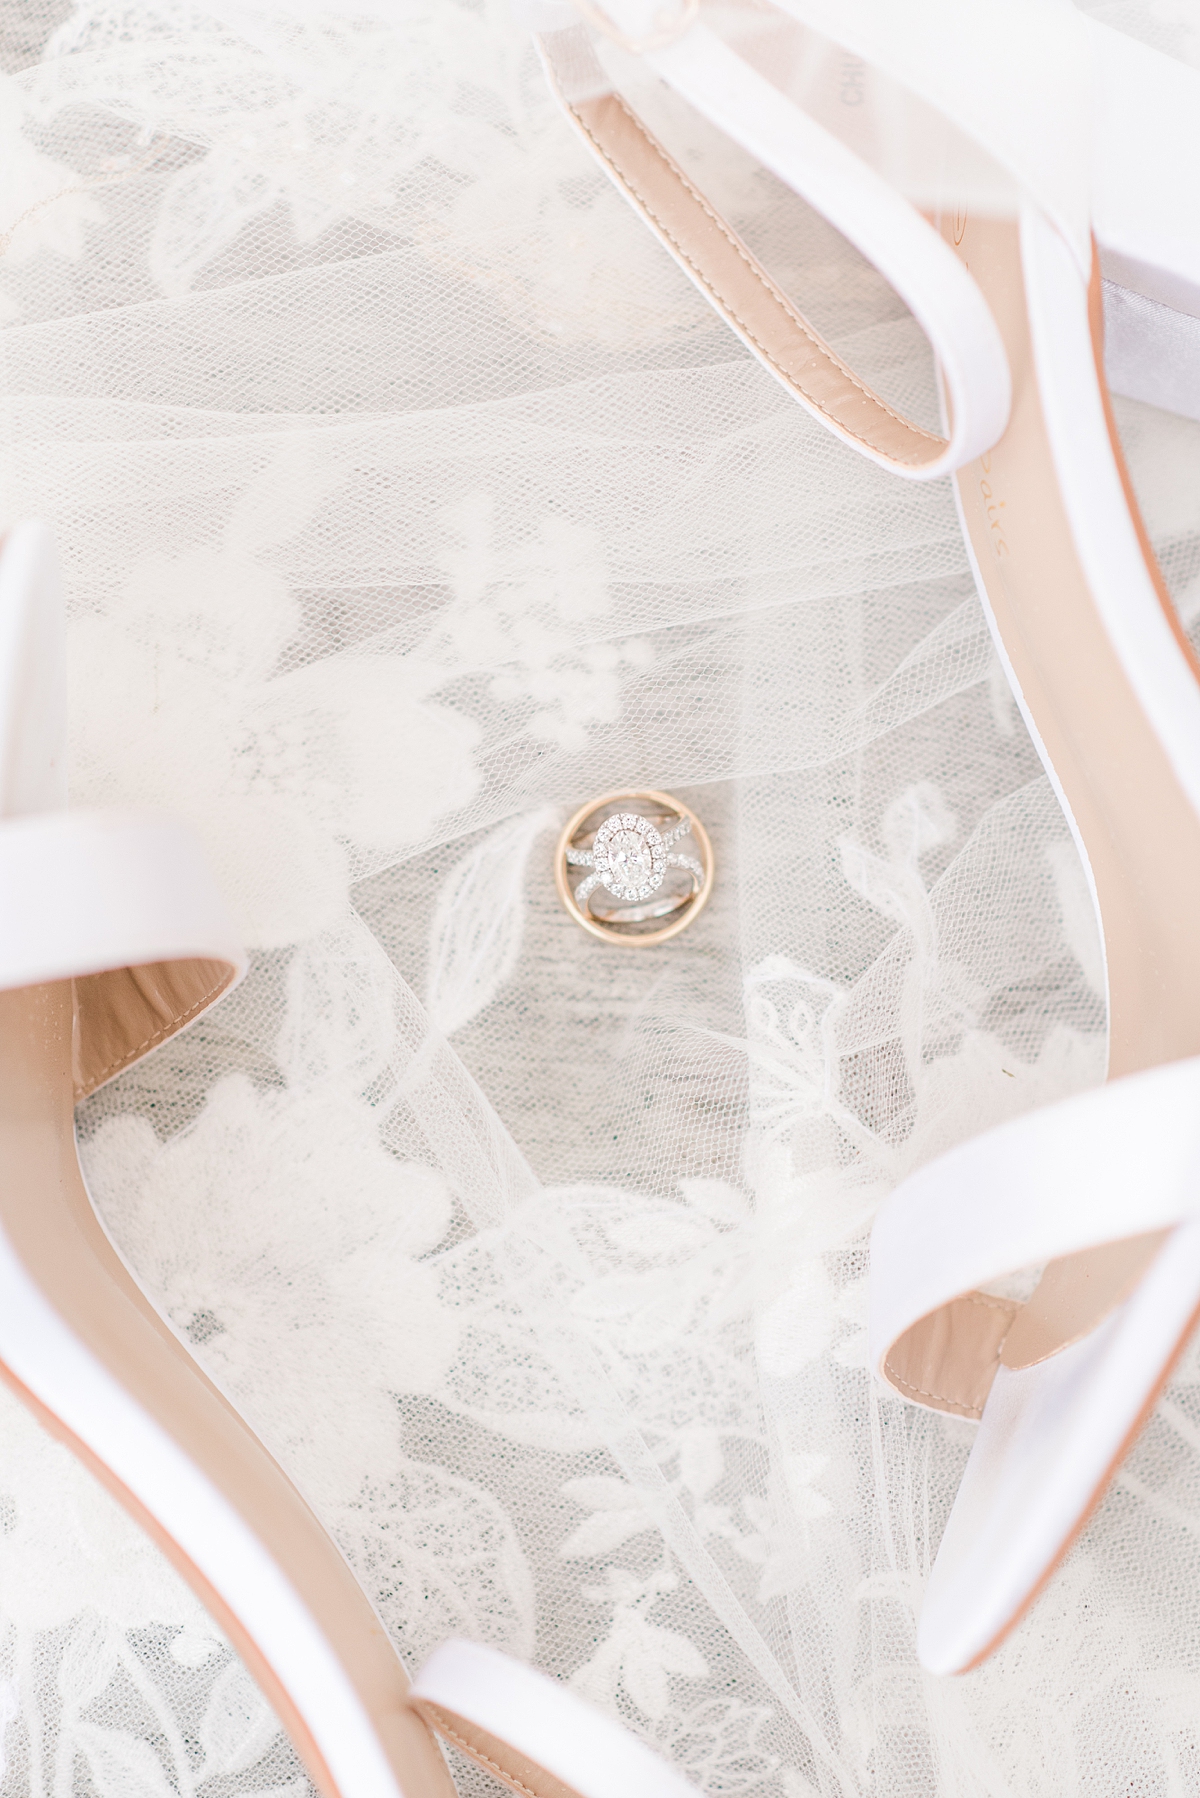 Wedding Rings and Shoes Bridal Details at Grace Estate Winery Summer Wedding. Wedding Photography by Richmond Wedding Photographer Kailey Brianne Photography. 